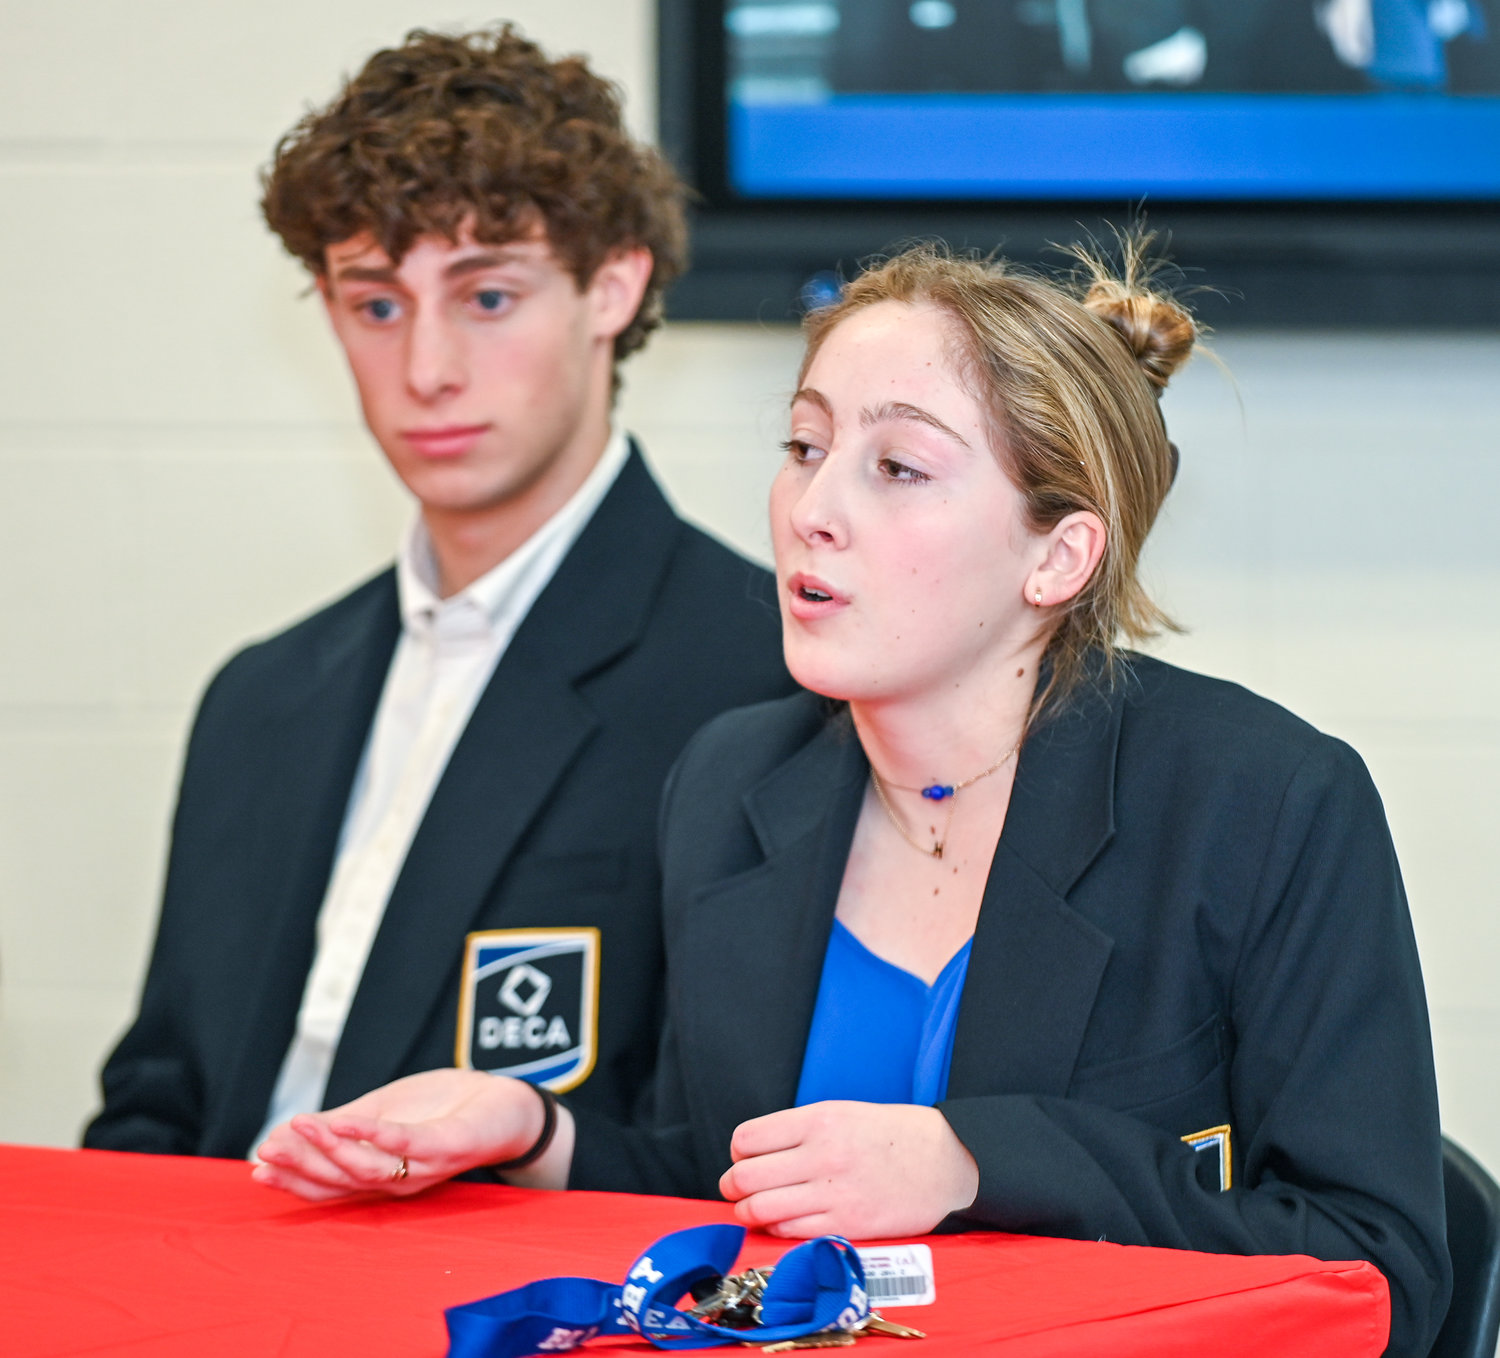 South Side High School senior Hailey Ferraro-Reich noted some of the real-world skills she picked up from the DECA Club and I.B. Business programs.